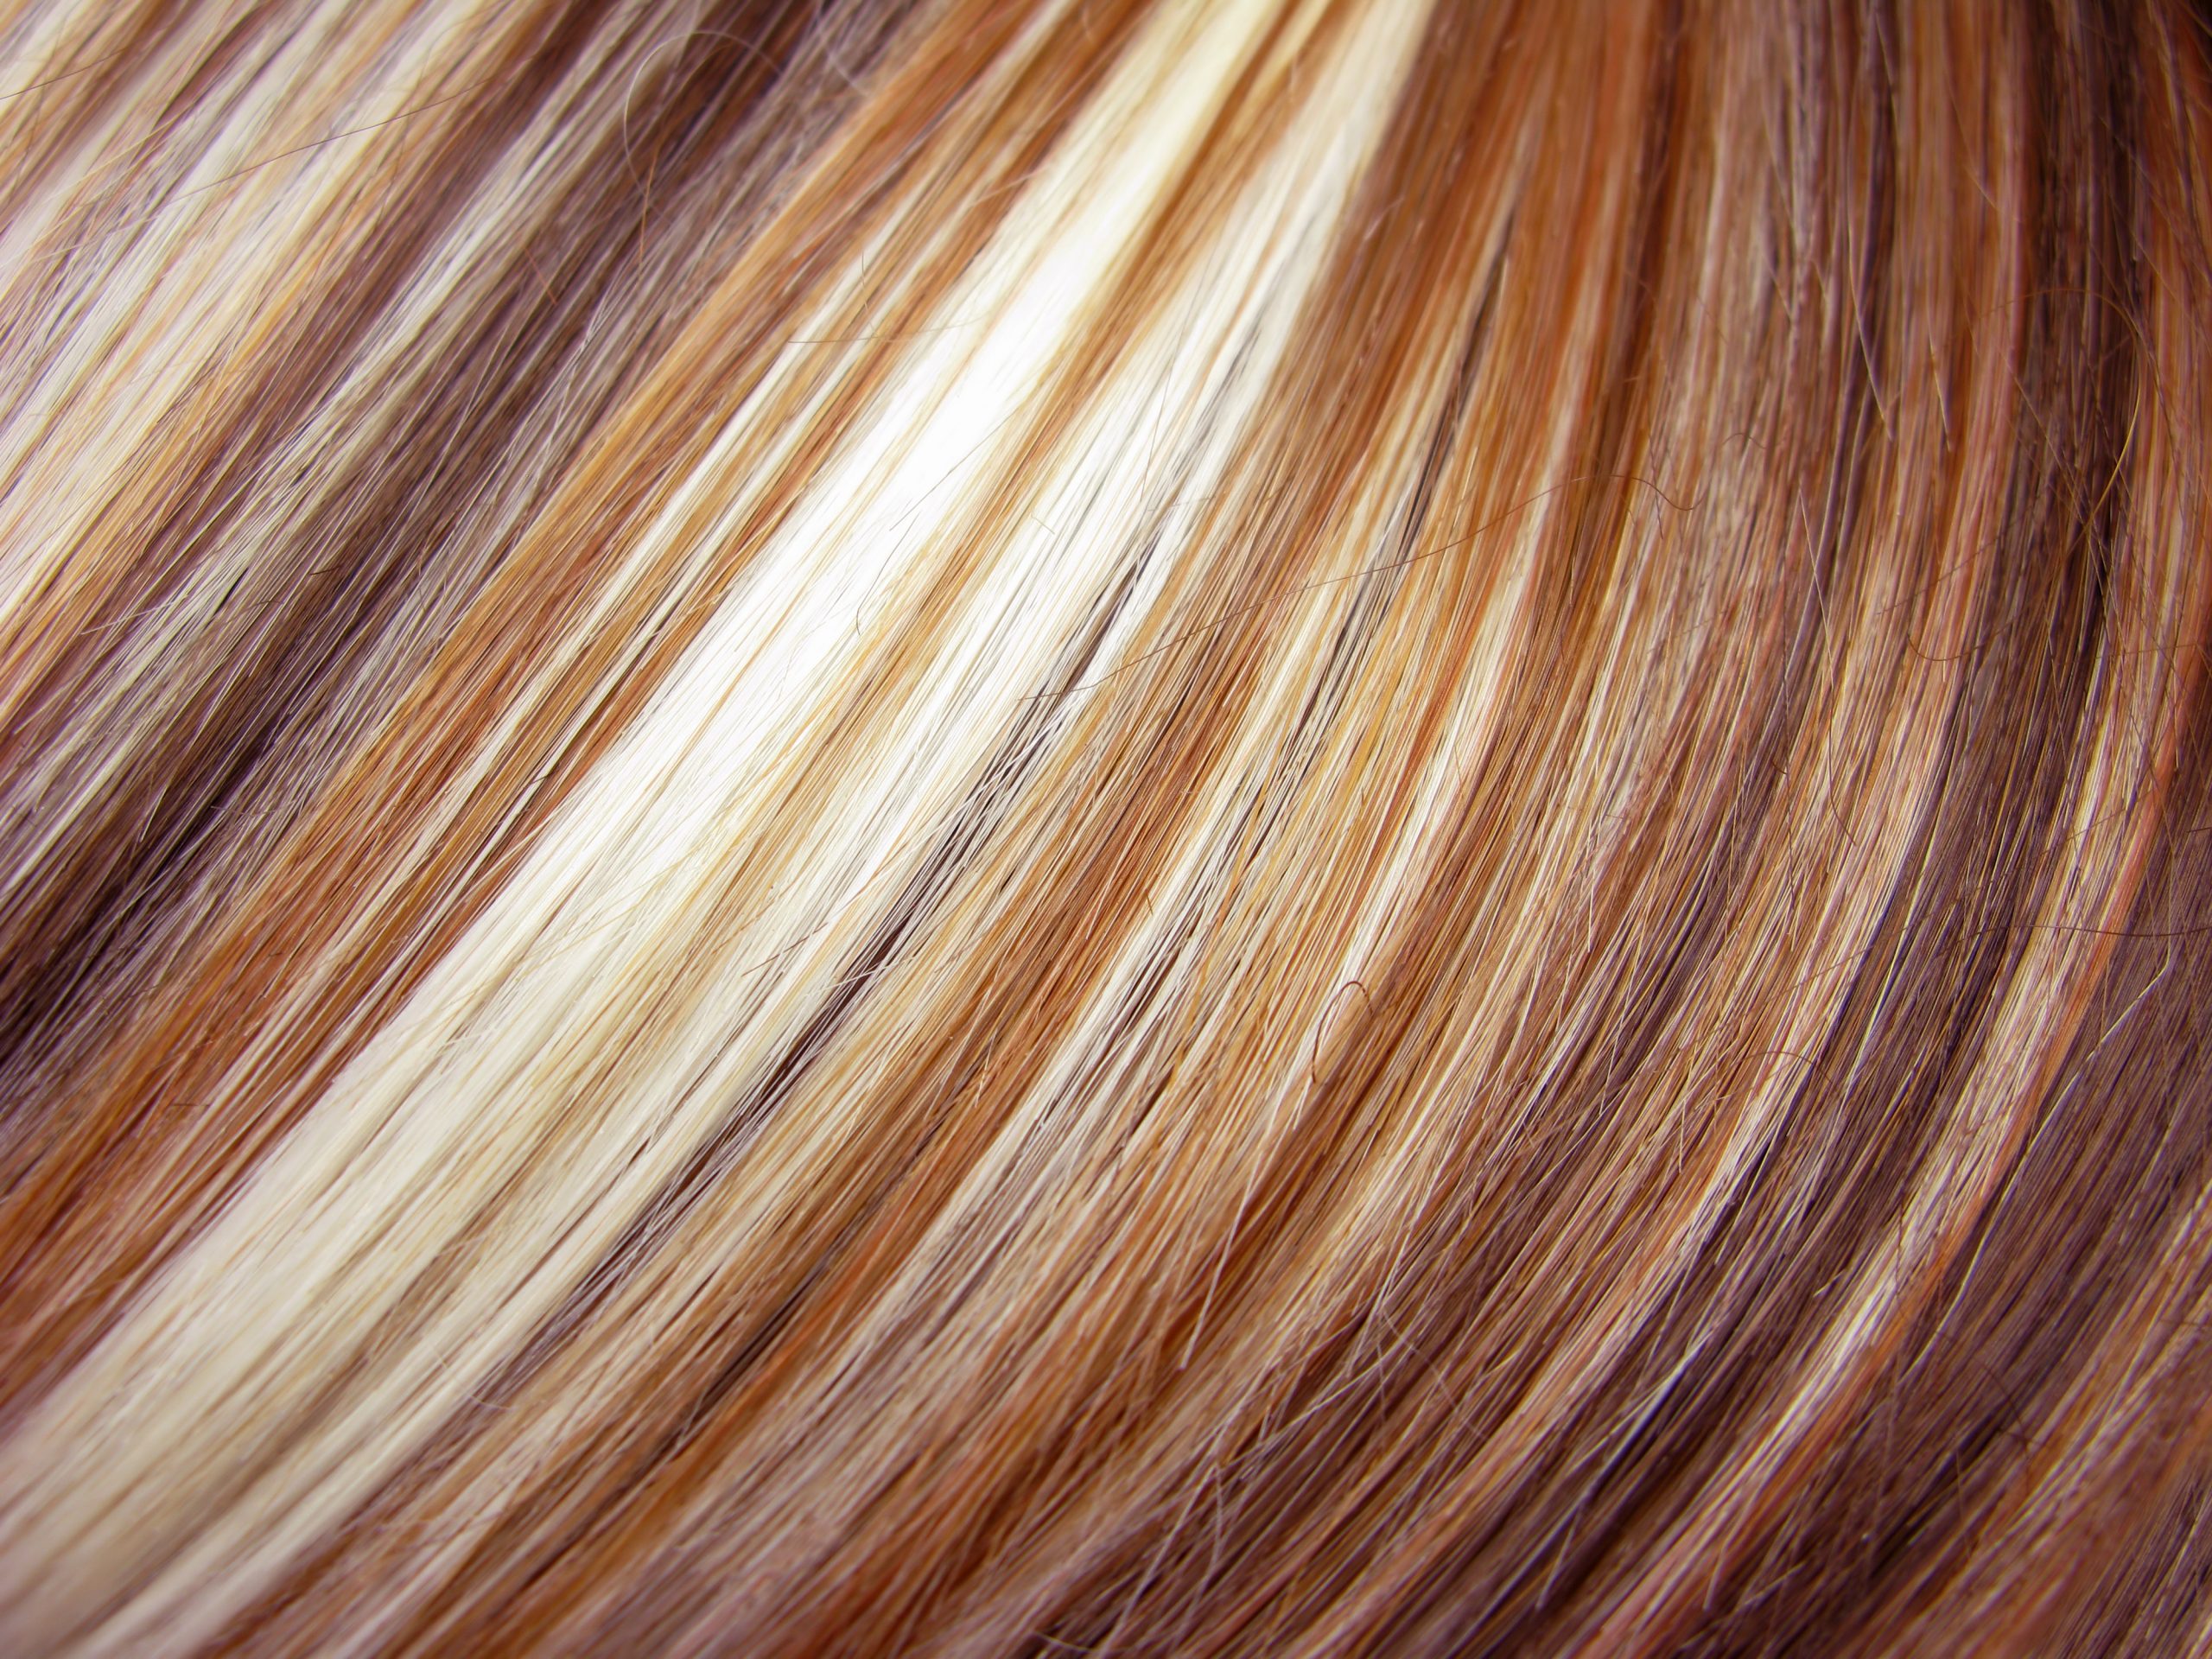 An image of many colors of hair possible at a Boring hair color salon